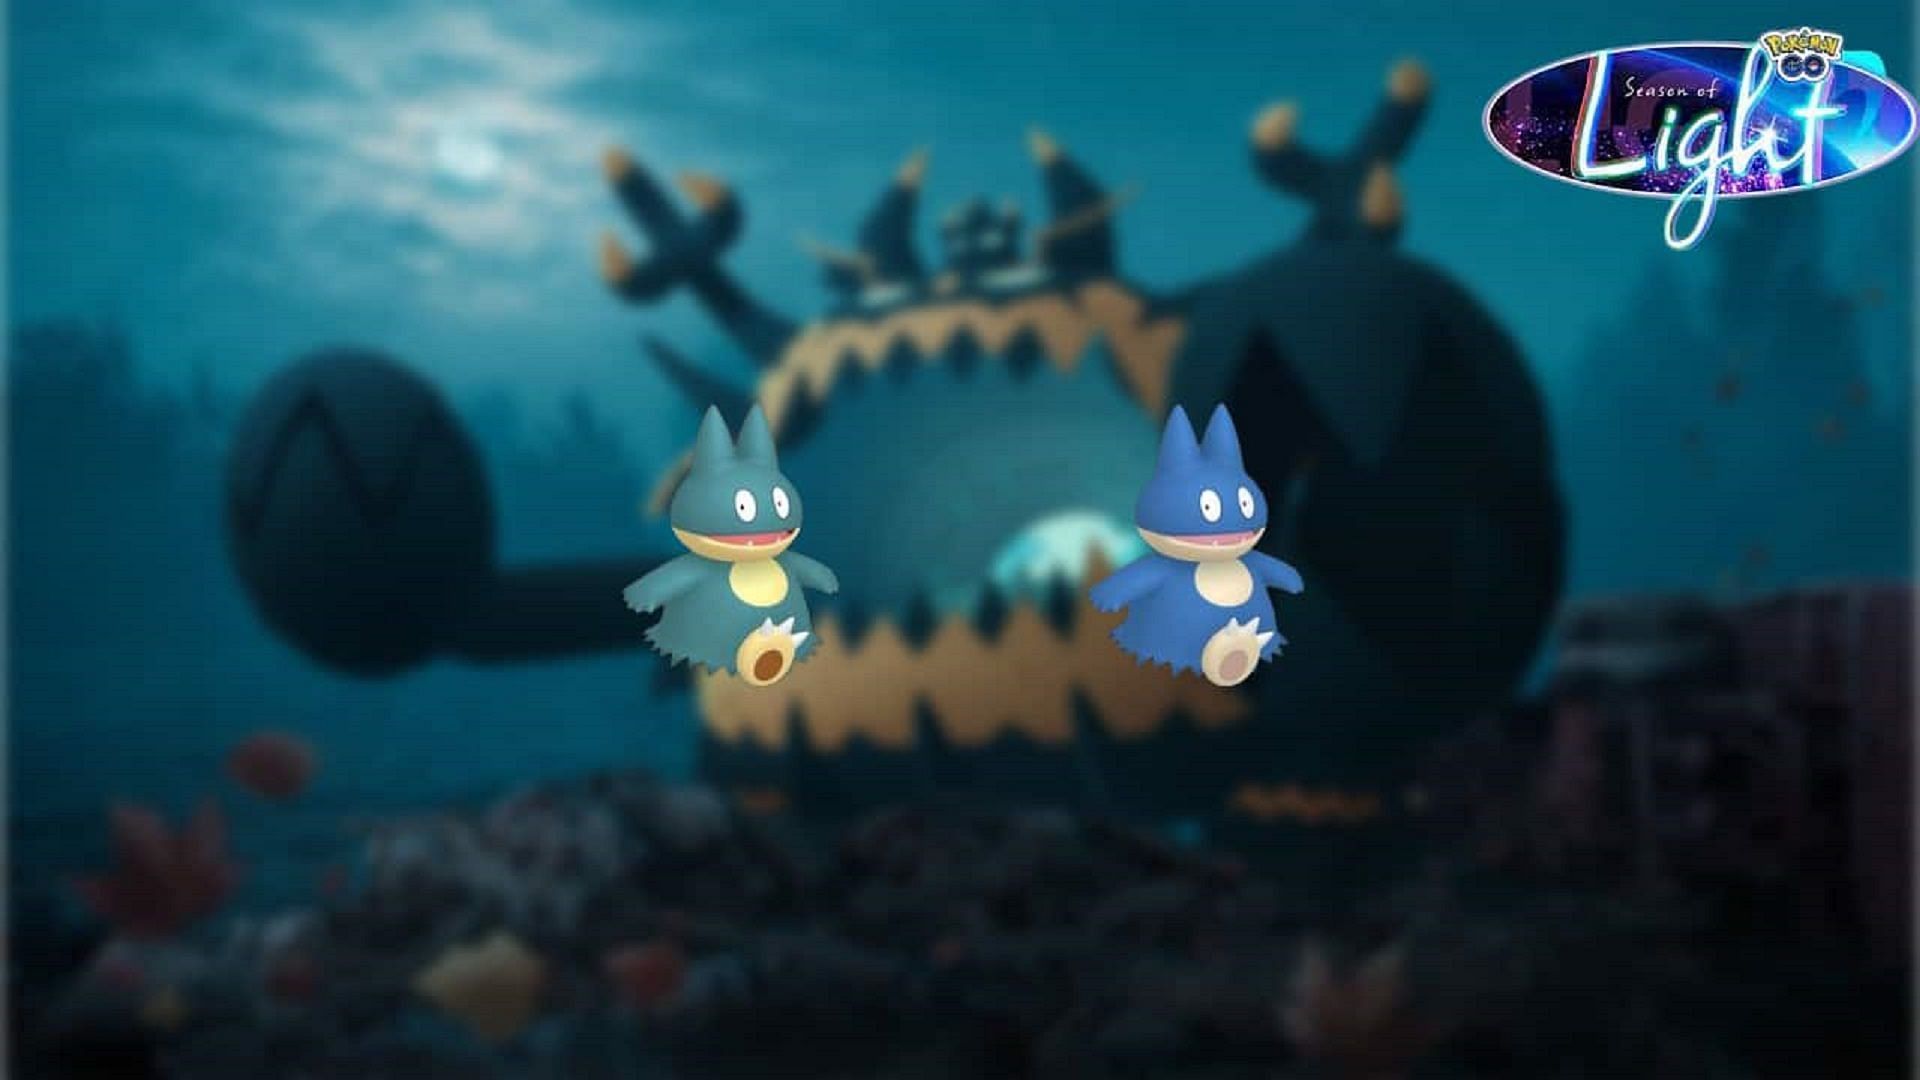 Pokemon Go: Guzzlord and Shiny Munchlax Arrive in the Next Event